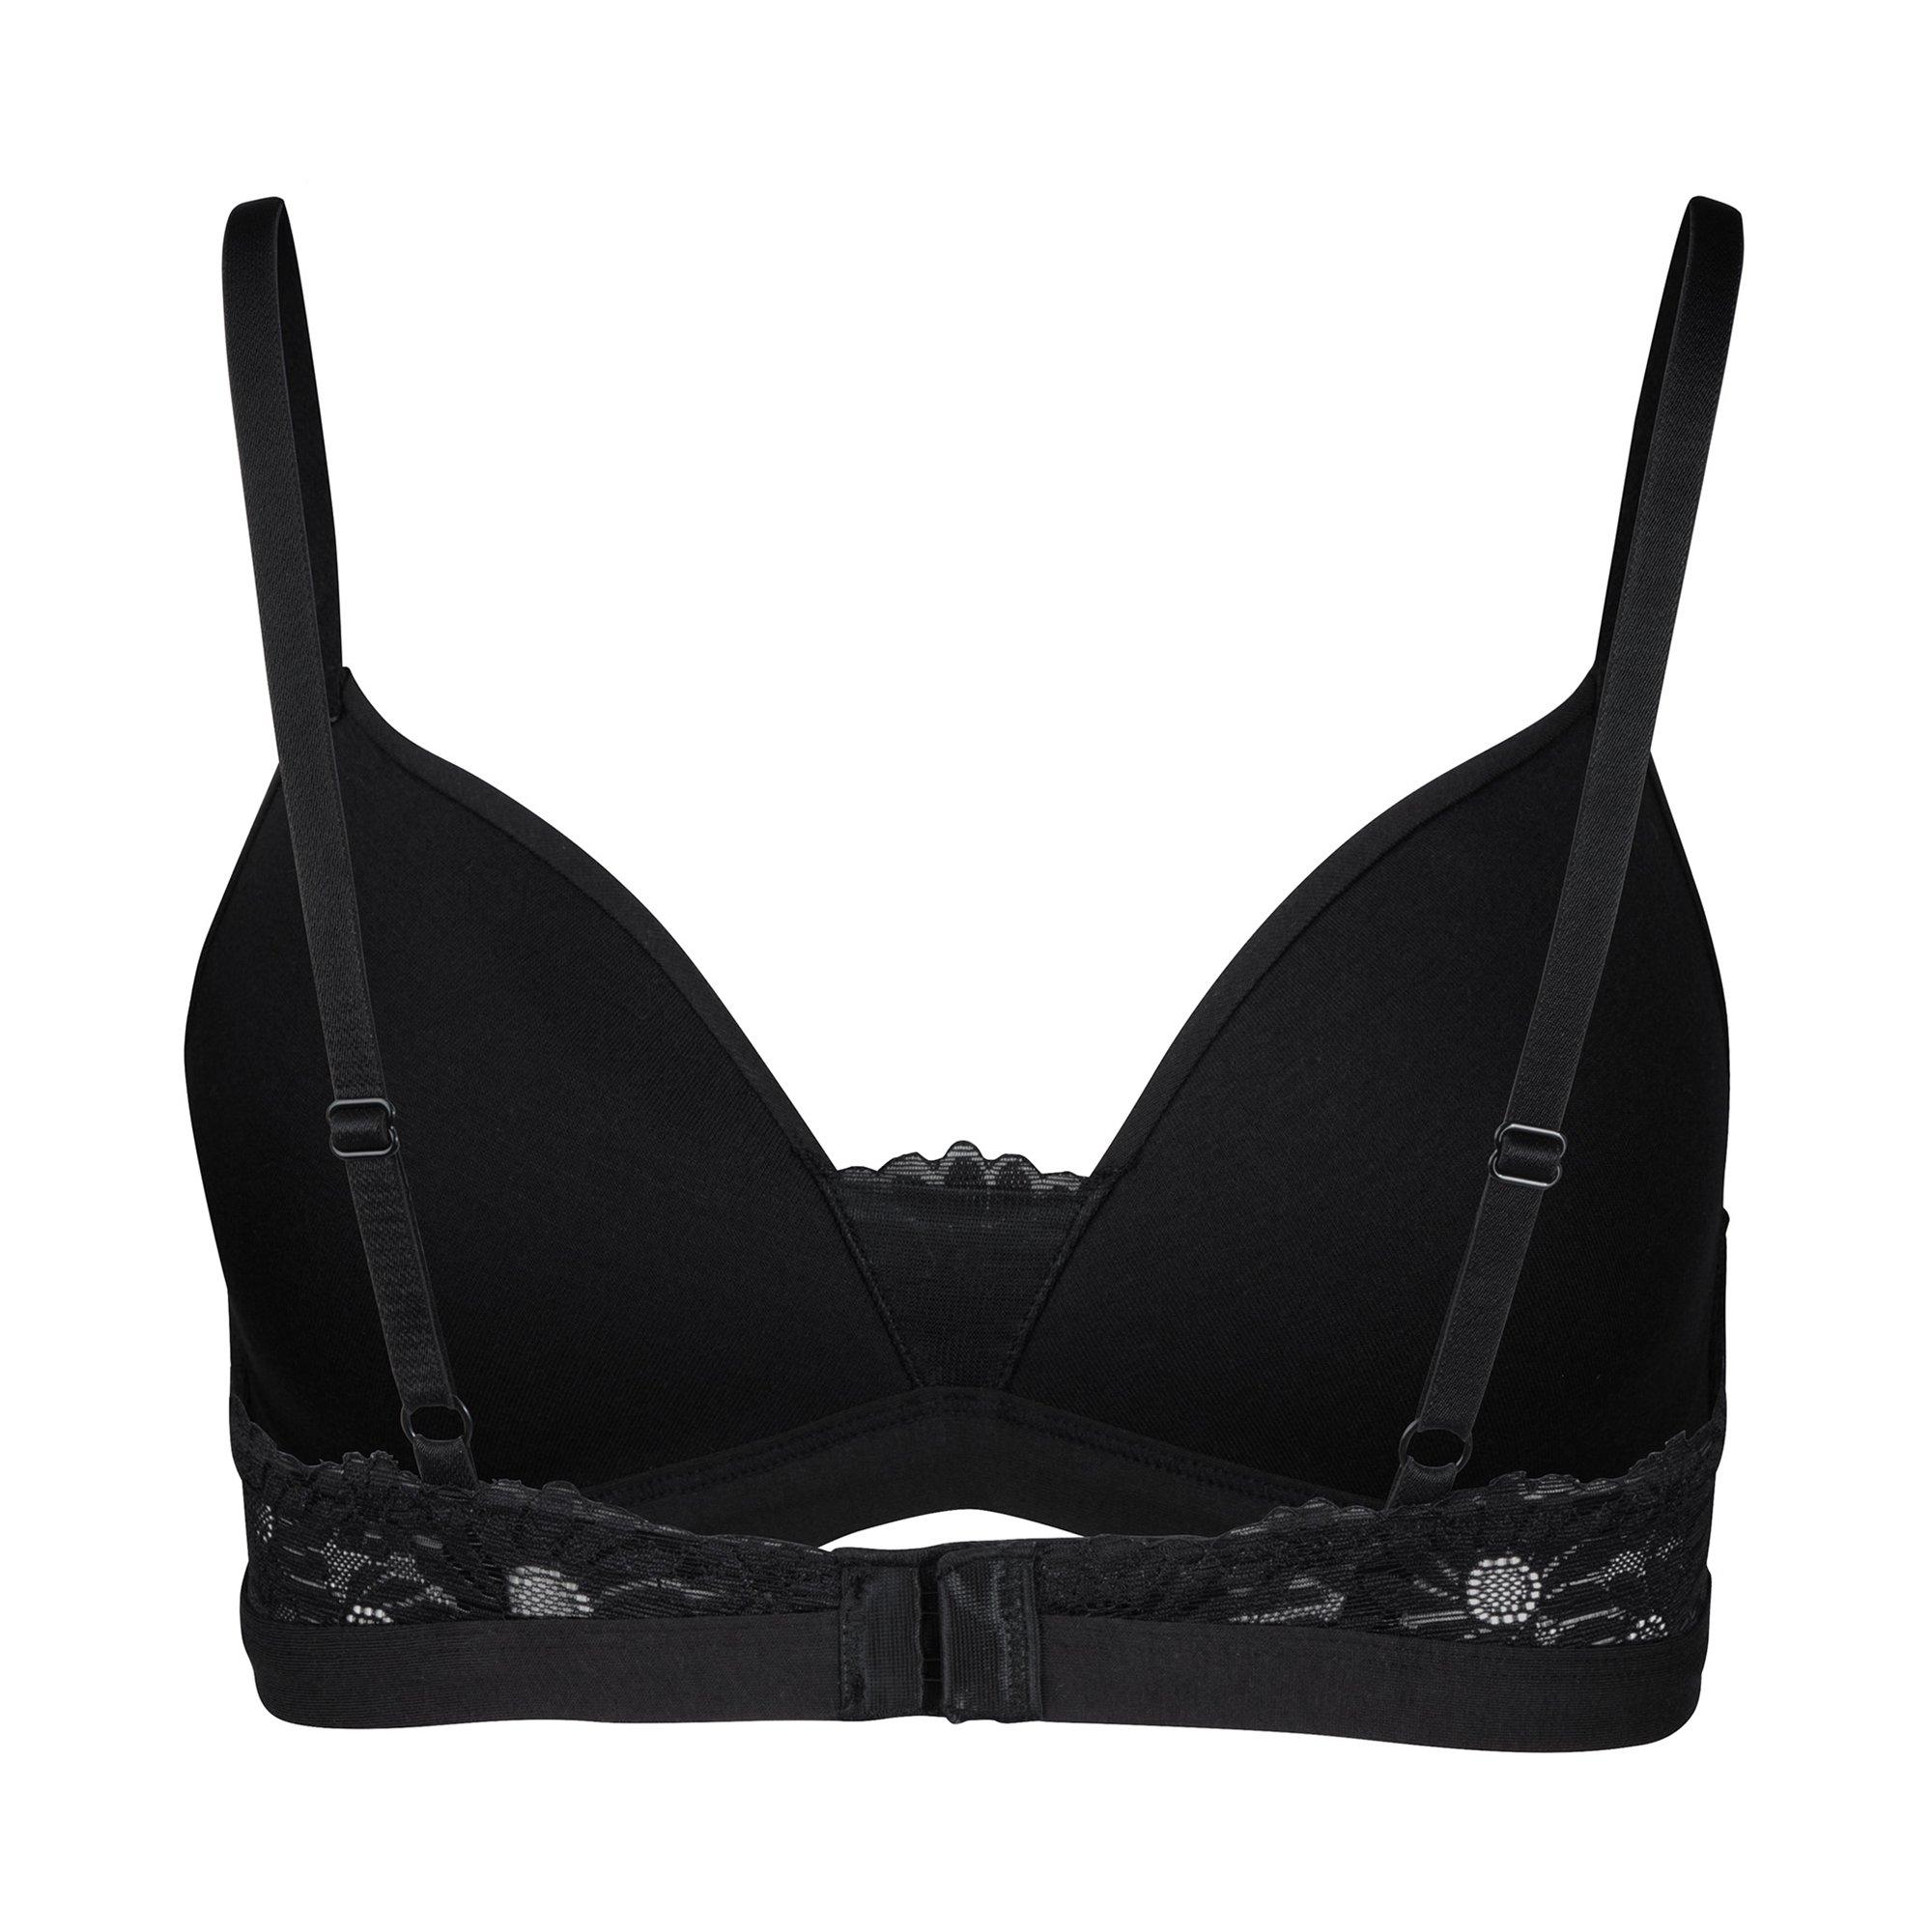 Skiny Every Day In CottonLace Multip Soutien-Gorge 